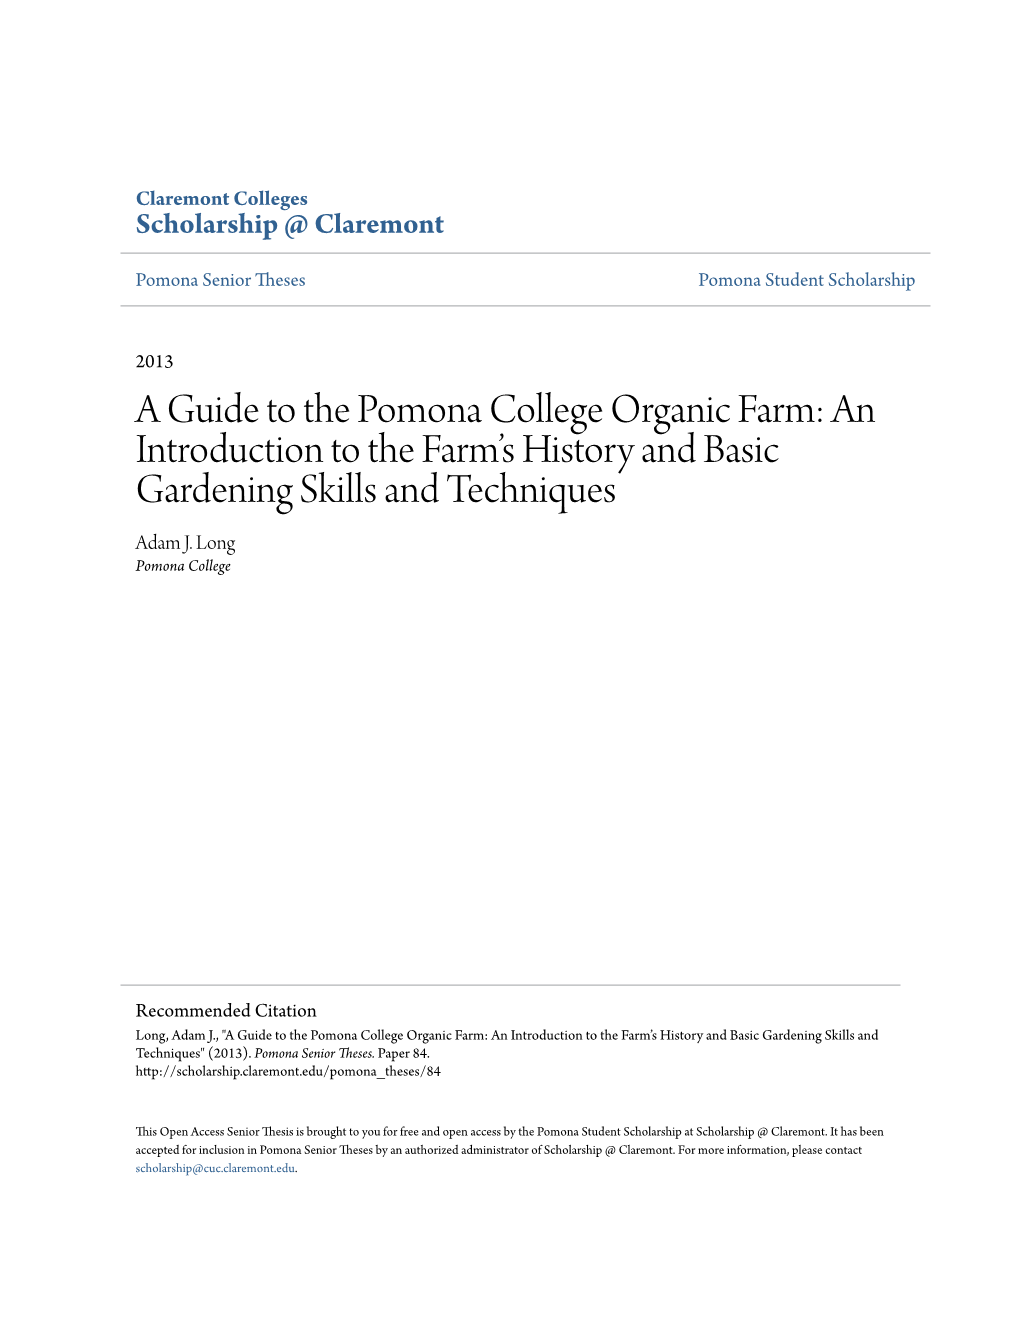 A Guide to the Pomona College Organic Farm: an Introduction to the Farm’S History and Basic Gardening Skills and Techniques Adam J